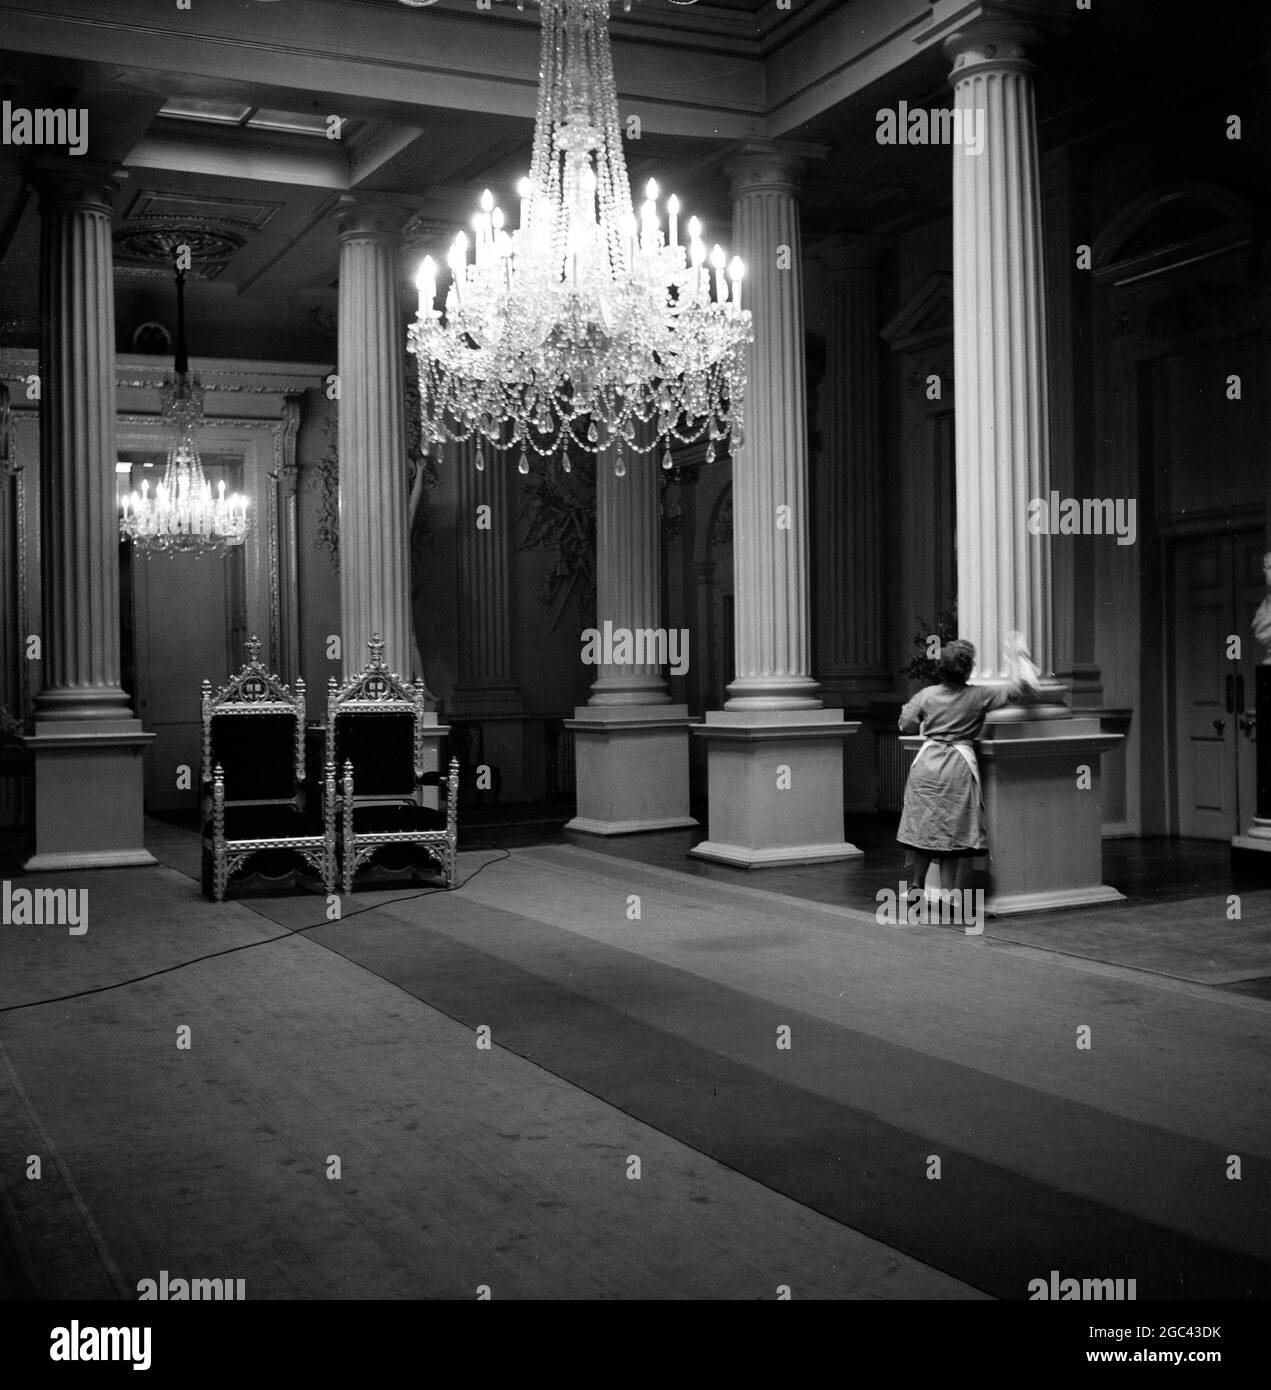 Behind the scenes at a state banquet. Homecoming banquet for Queen Elizabeth II at the Mansion House, London after her Commonwealth Tour in 1954. The catering firm of Ring & Brymer (Birch’s) Ltd have handled the catering at every Coronation banquet given by the Corporation of London since Queen Victoria’s Coronation and have catered for more crowned heads than any other firm in the world. 19 May 1954 Photo shows: Inside, in the Venetian Salon, a cleaner dusts the pillars. The chairs are those in which the Lord Major and the Mayoress – Sir Noel Bowater and Lady Bowater – will sit to receive the Stock Photo